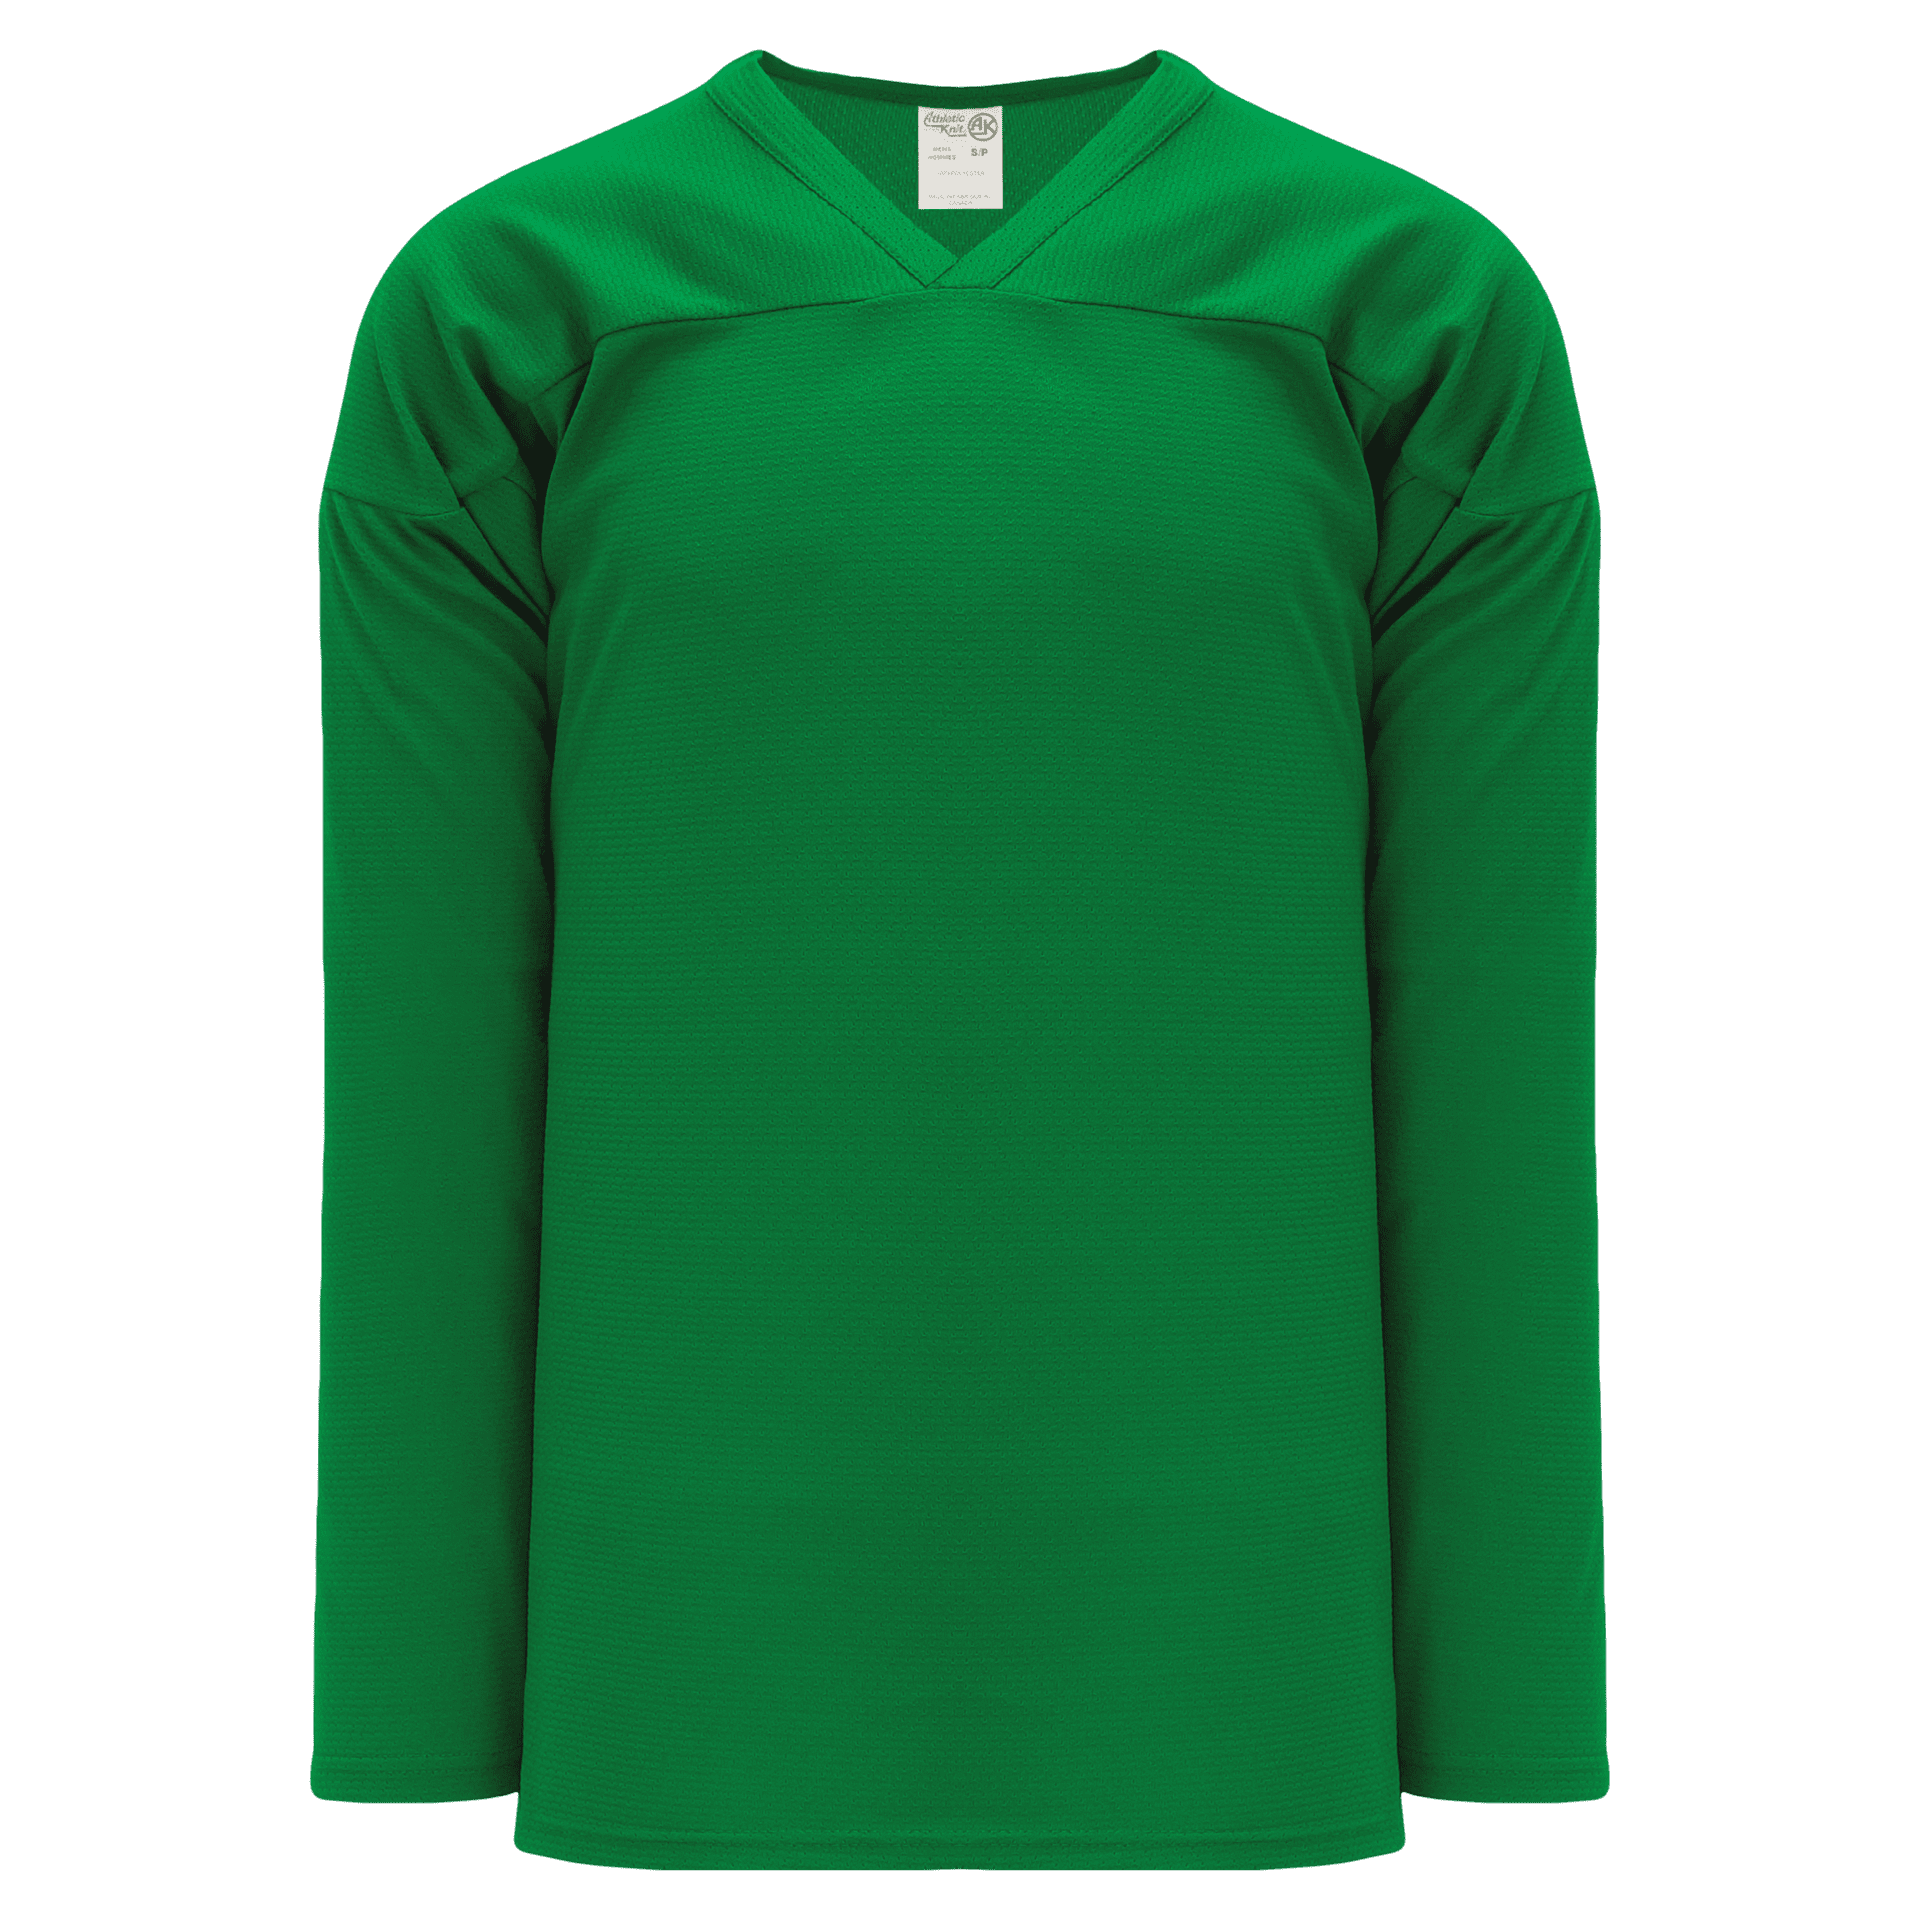 ATHLETIC KNIT PRACTICE HOCKEY JERSEY #H6000 Kelly Green